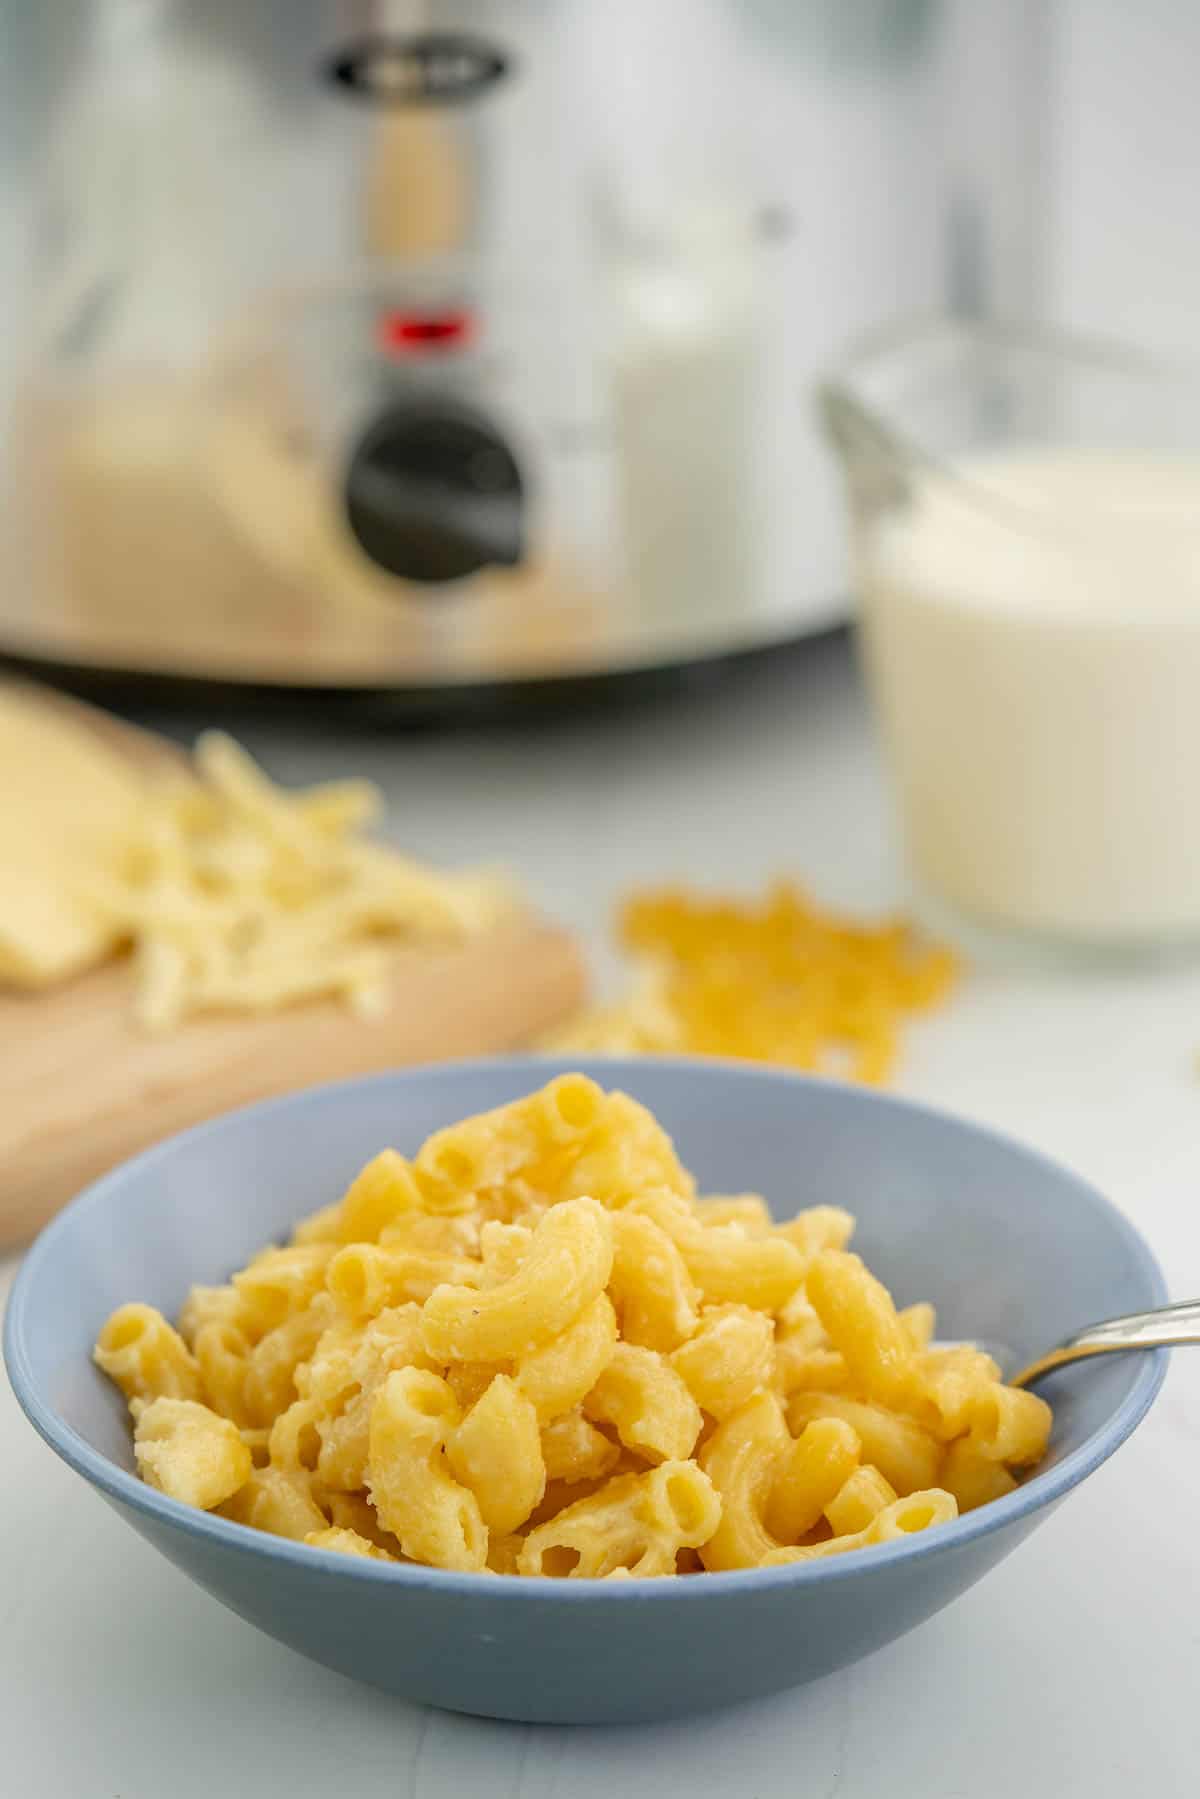 A two tone blue ceramic bowl of macaroni cheese in front of slow cooker, grated cheese and a glass jug of milk.